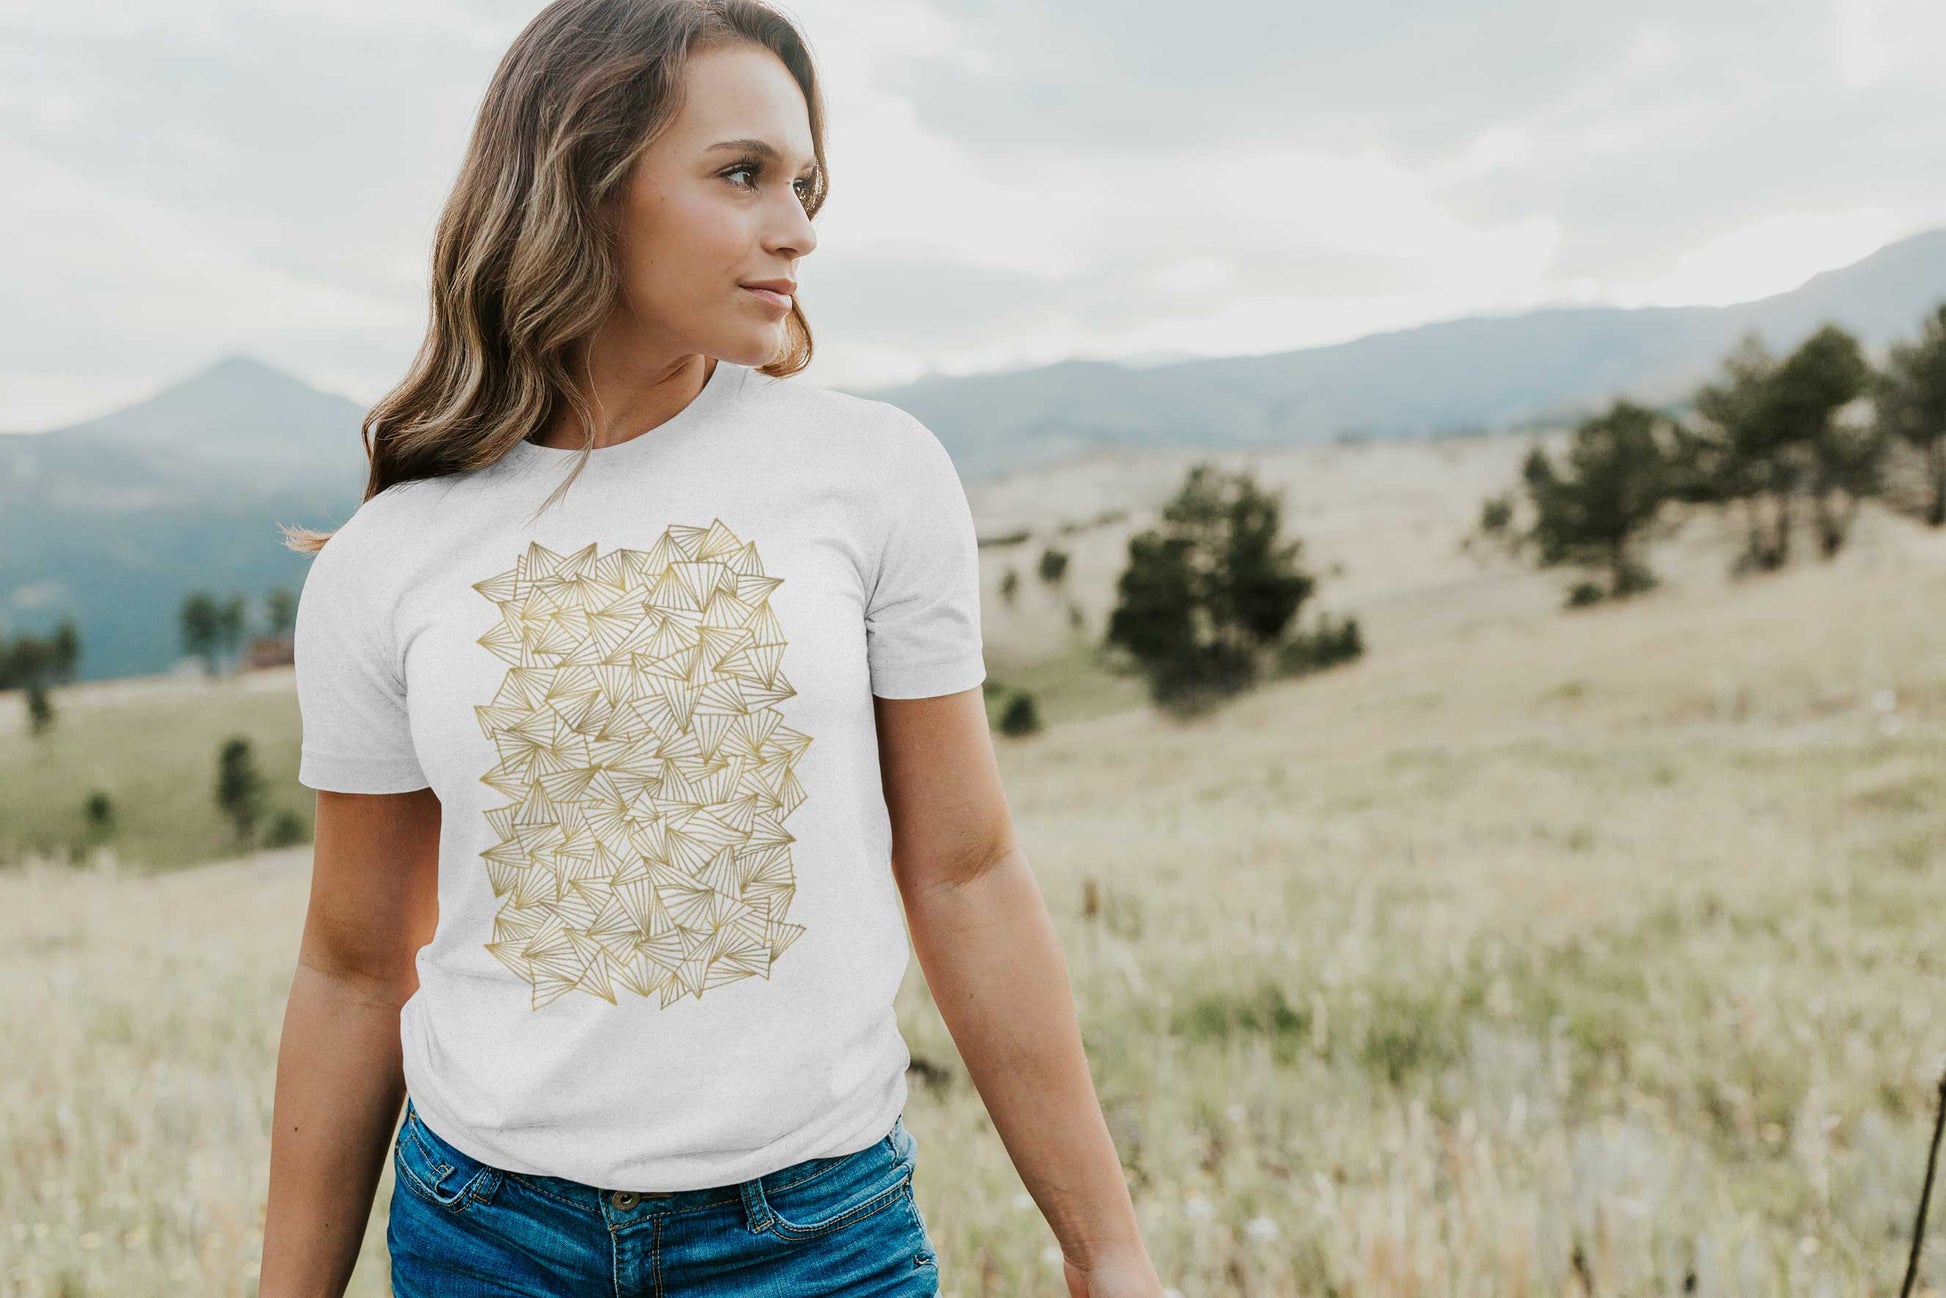 Model posing in a field with gaggle of triangles gold design on white unisex t-shirt.